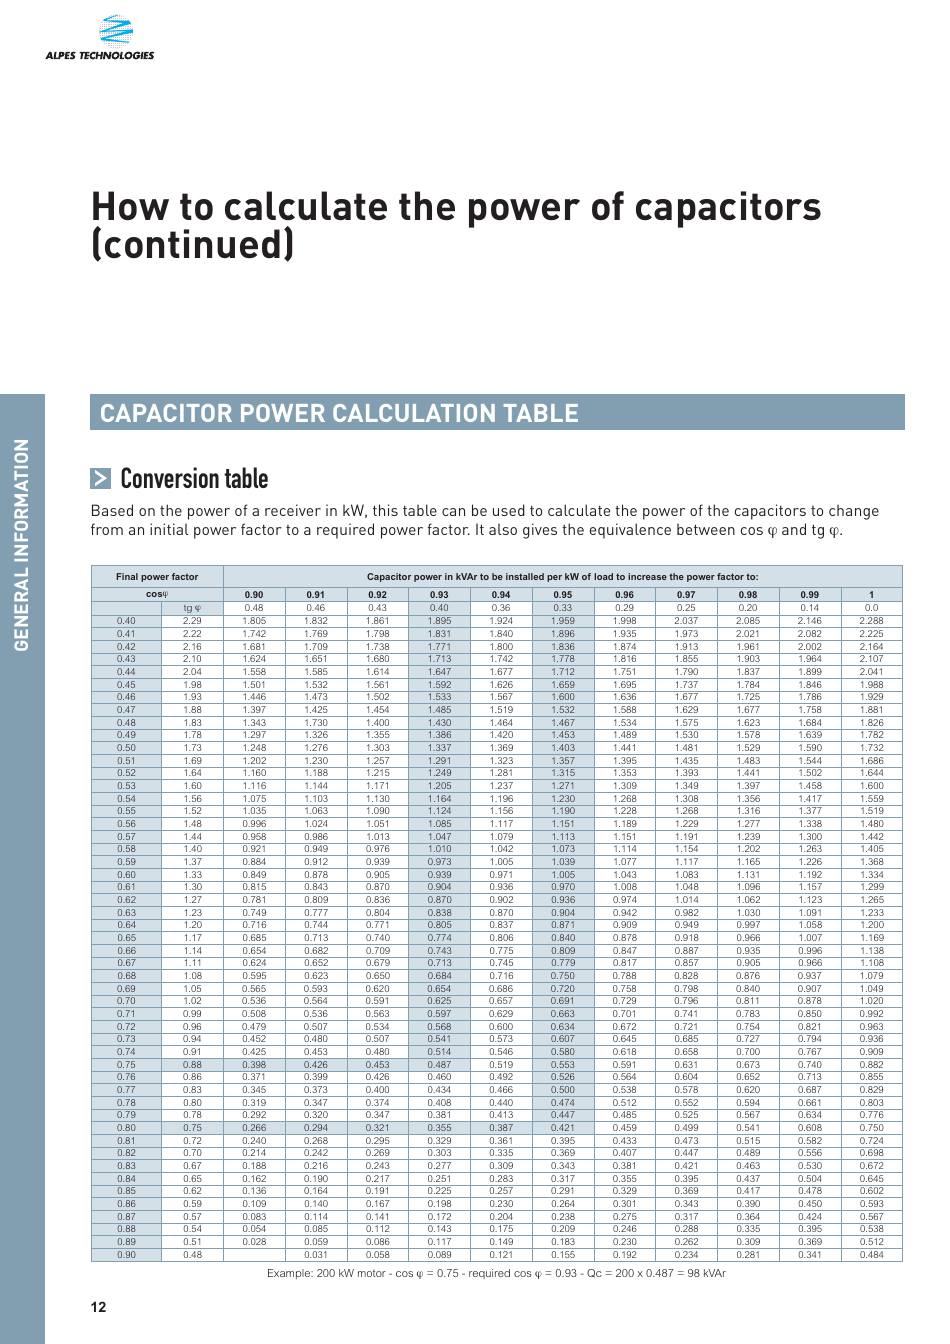 Capacitor Power Conversion Chart - Documents and Templates at TemplateRoller.com